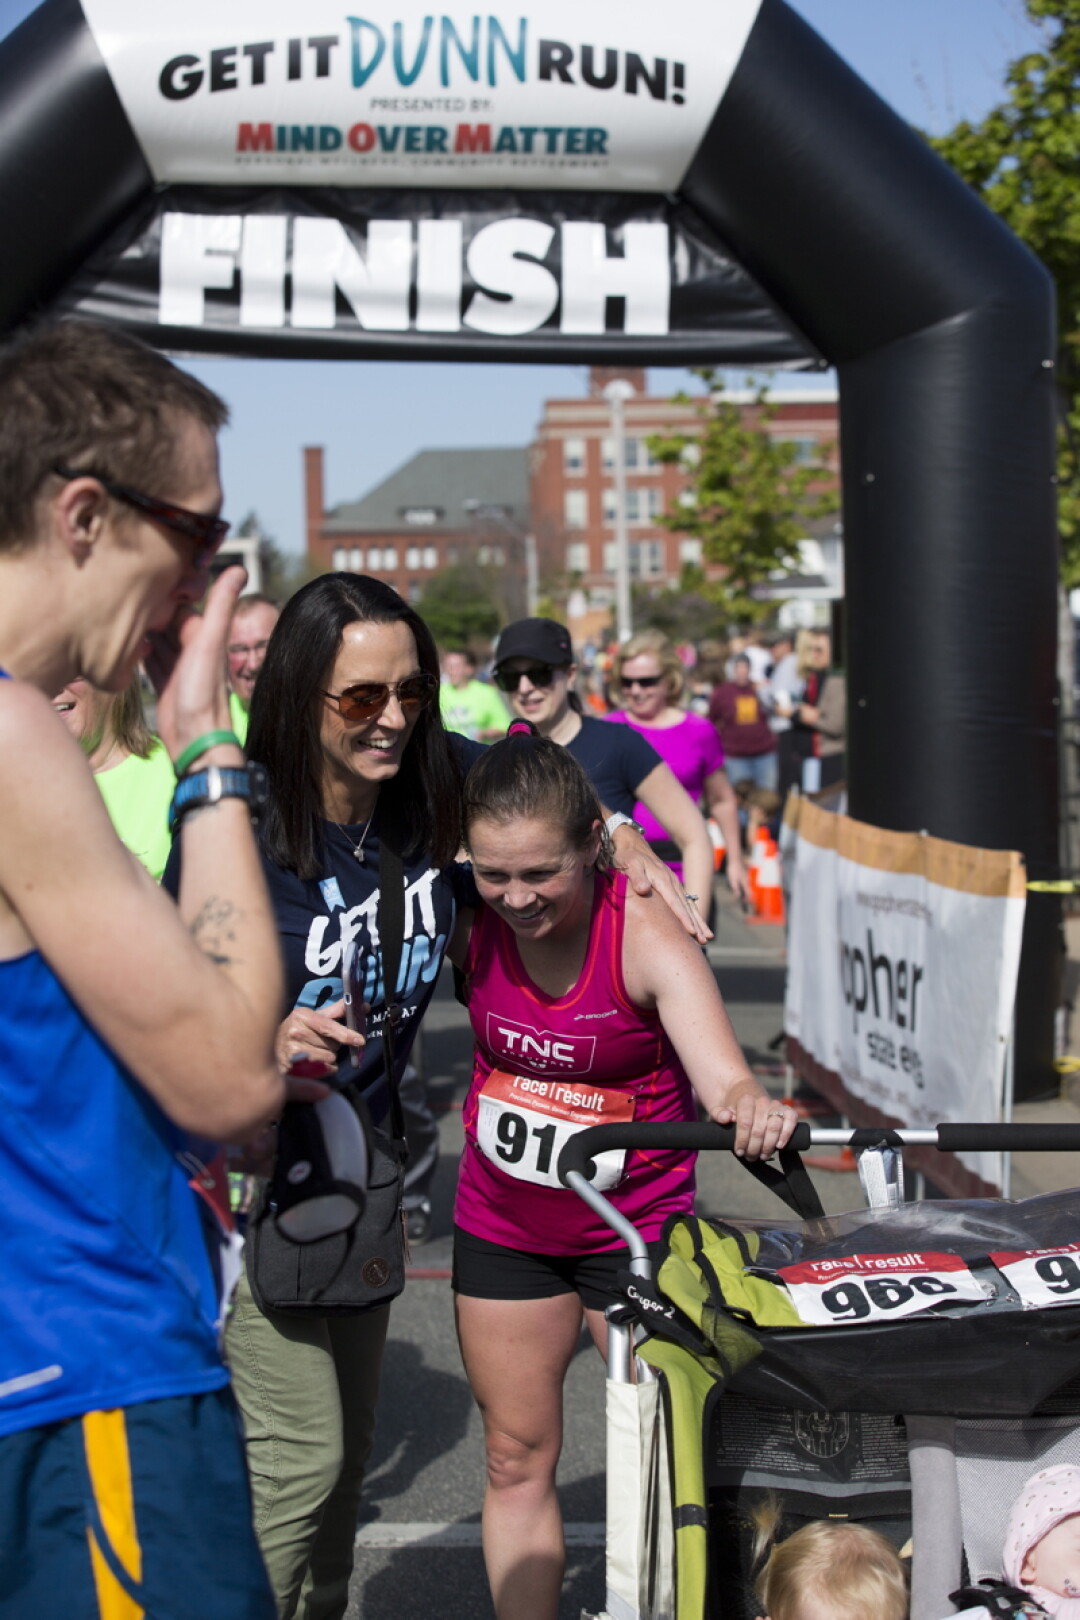 SHE DUNN IT.  Nichole Porath broke her own world record for the fastest women’s half marathon with a double stroller at the 2018 Get it Dunn Run in Menomonie.